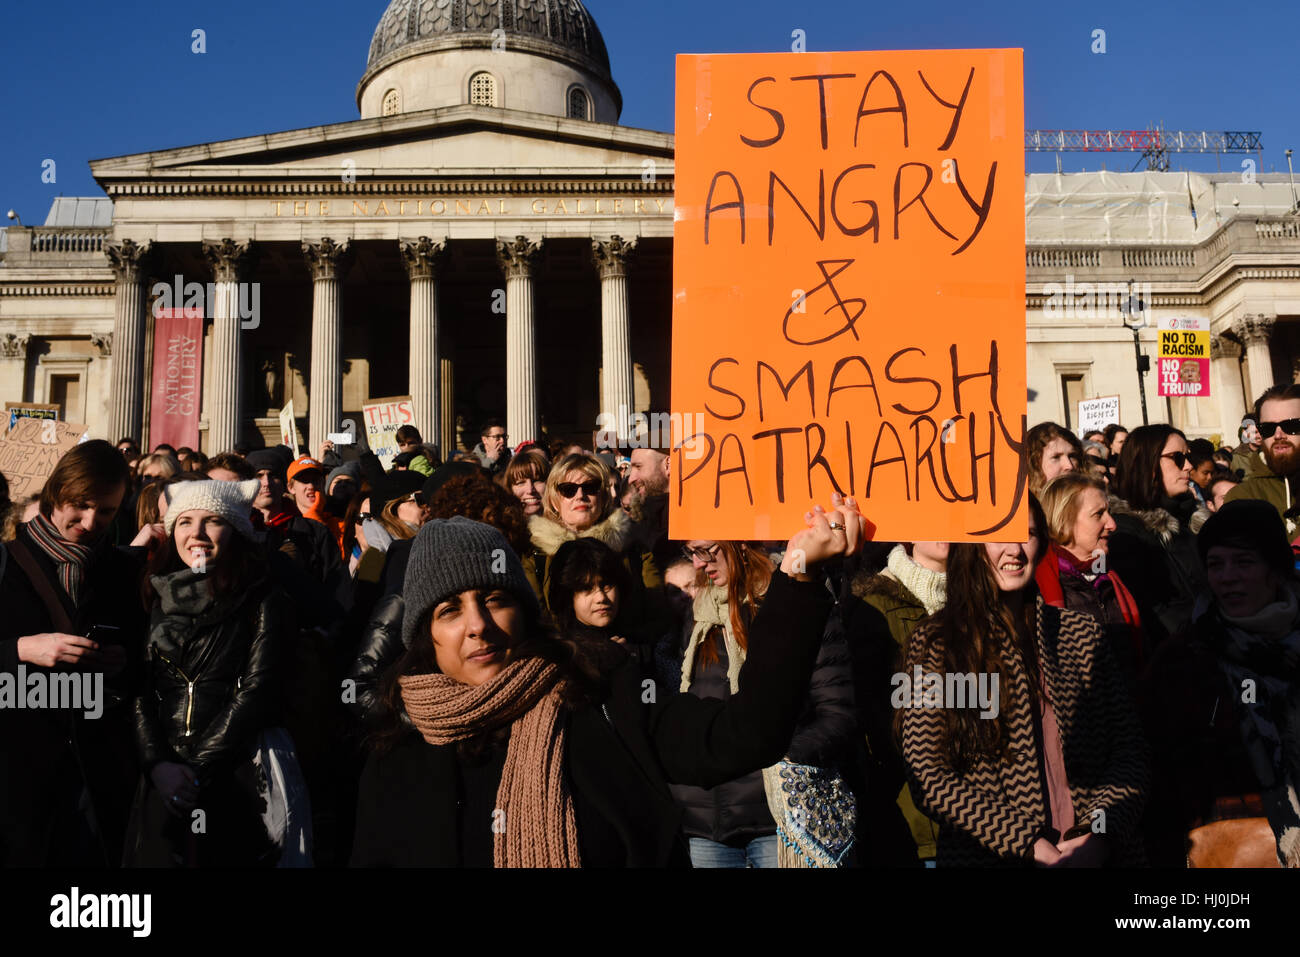 London, UK. 21st Jan, 2017. Protesters at the Women's March to oppose Donald Trump gathered at Trafalgar Square after marching for a large rally. The march began at the US Embassy in Grosvenor Square. Credit: Jacob Sacks-Jones/Alamy Live News. Stock Photo